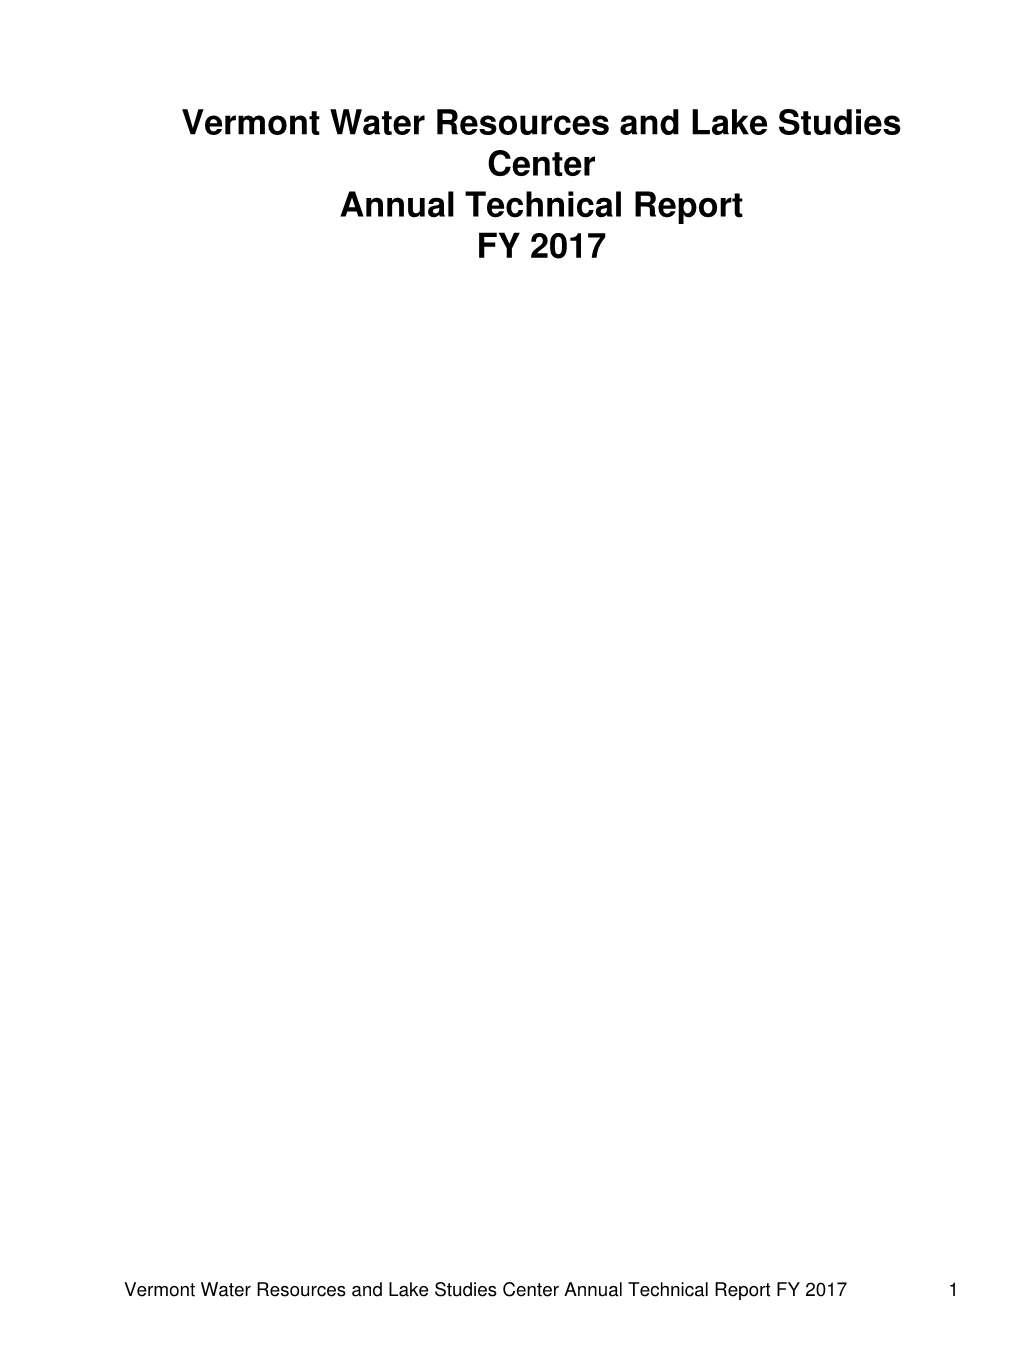 Vermont Water Resources and Lake Studies Center Annual Technical Report FY 2017